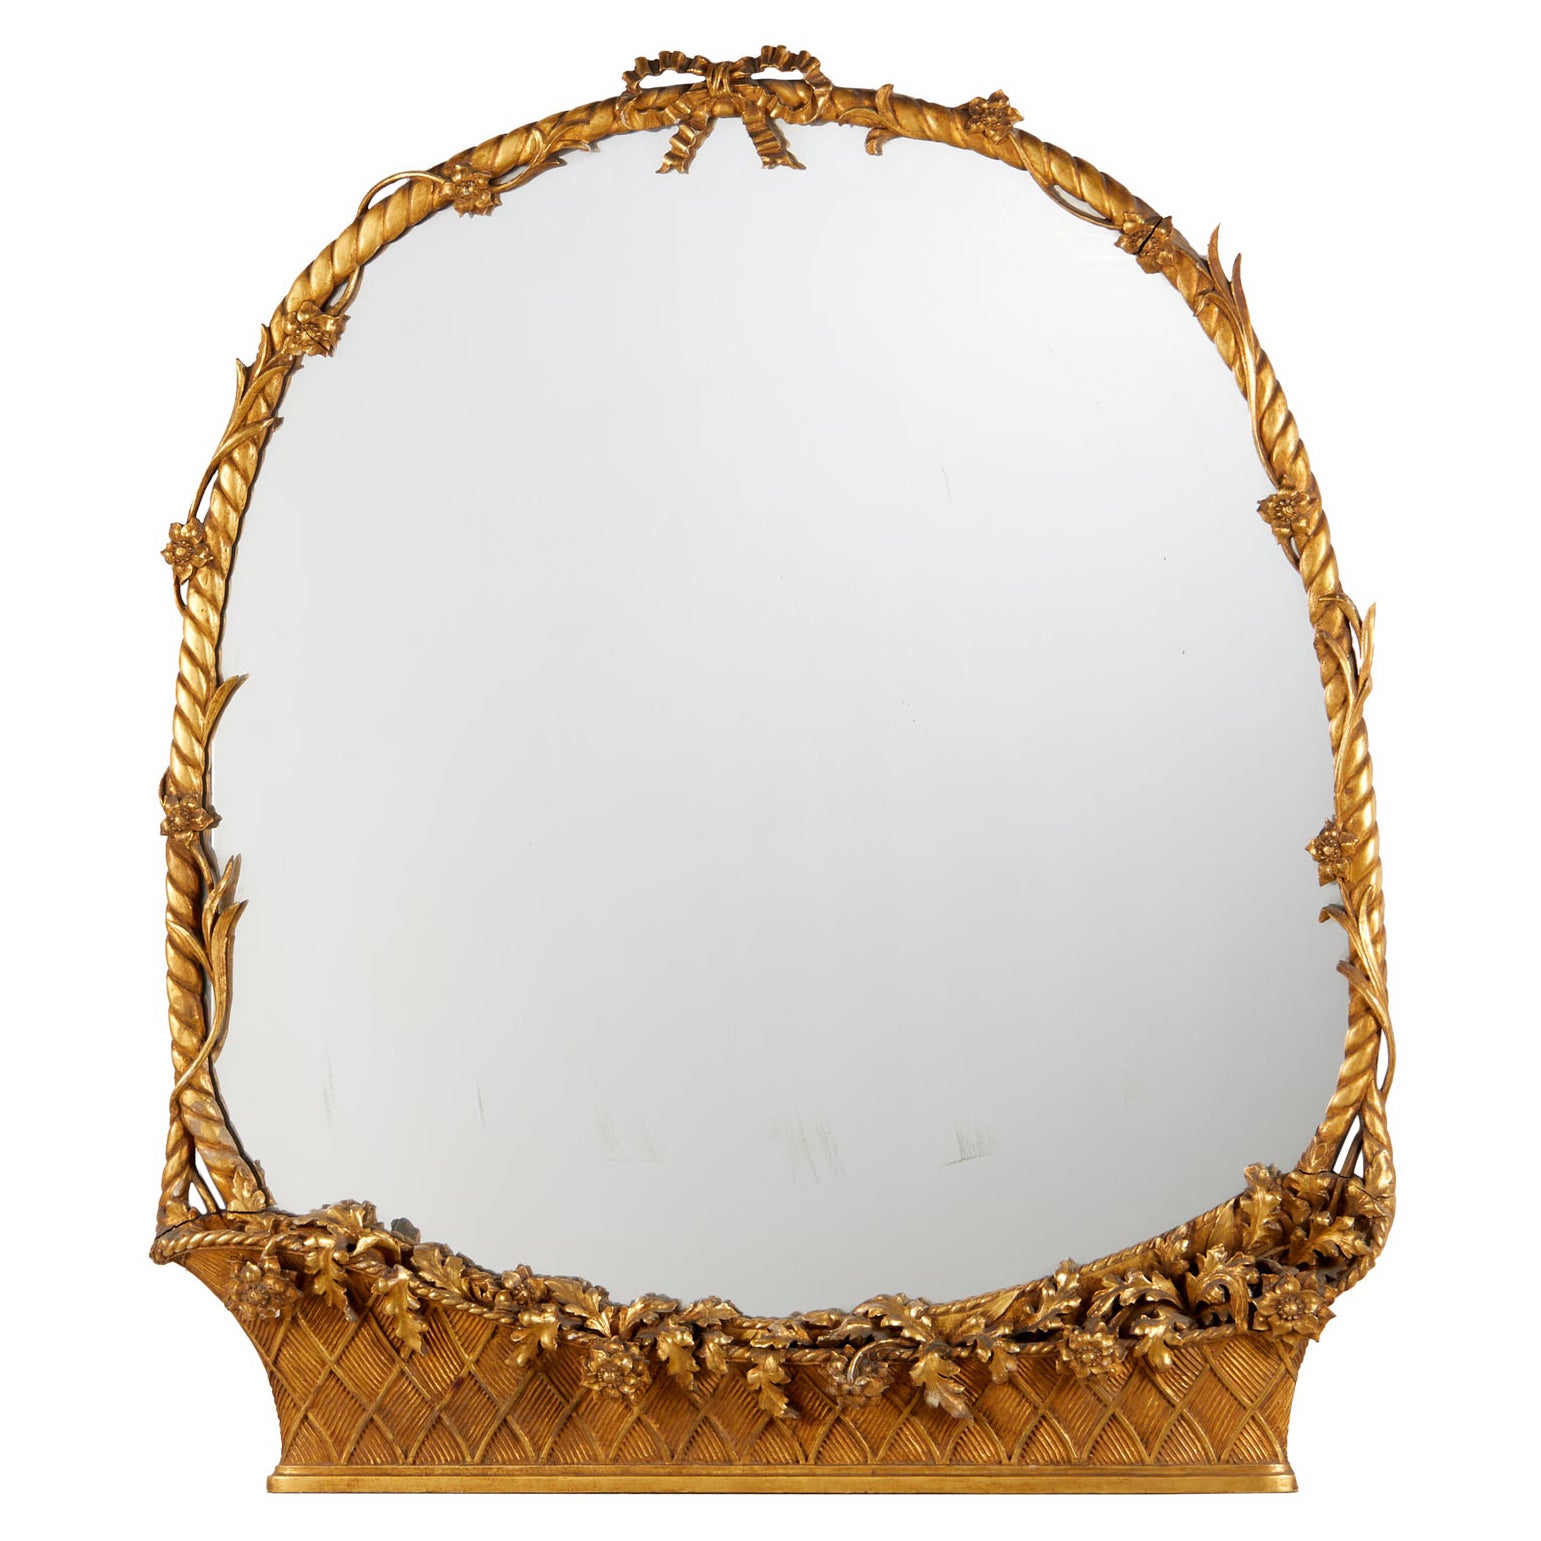 Vintage Louis XVI Style Italian Giltwood Wall Mirror in Floral Basket Form